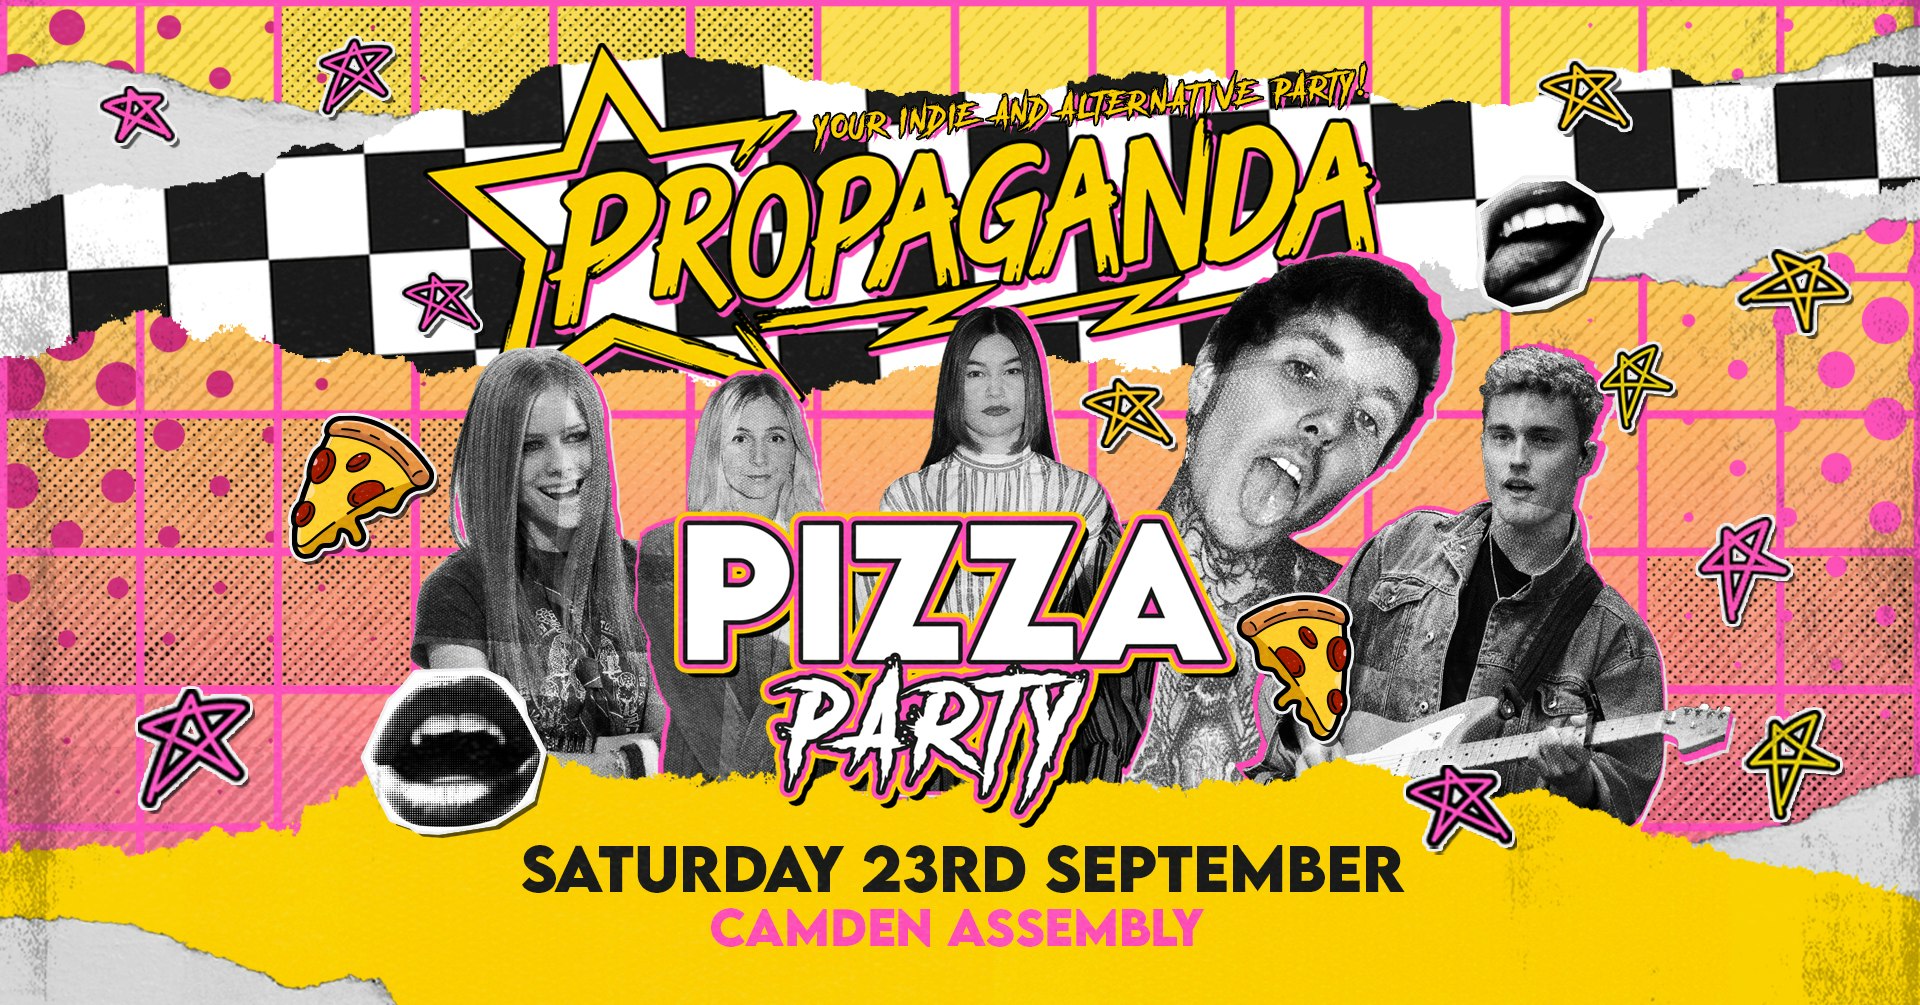 Propaganda London Pizza Party! – Your indie & alternative Party at Camden Assembly!